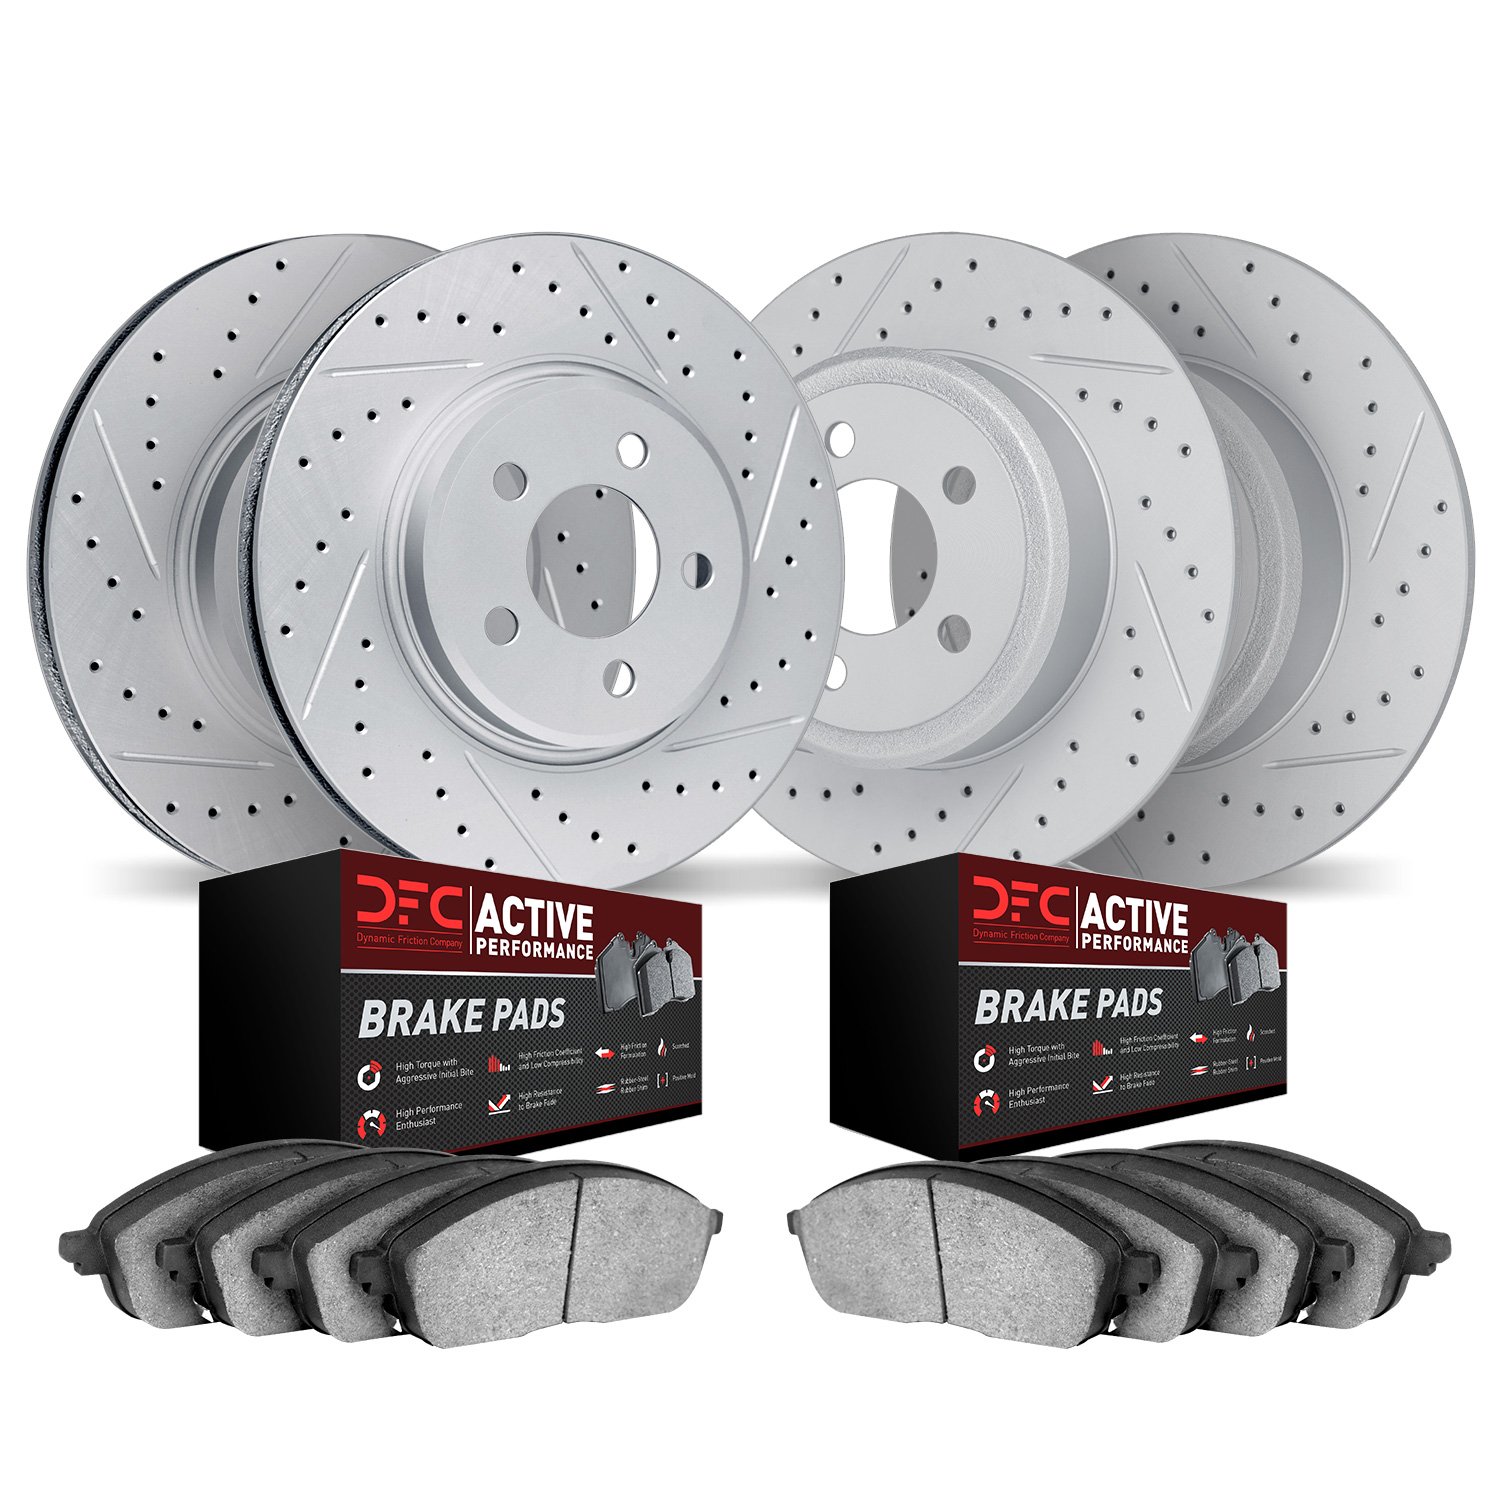 2704-31033 Geoperformance Drilled/Slotted Brake Rotors with Active Performance Pads Kit, 2001-2002 BMW, Position: Front and Rear